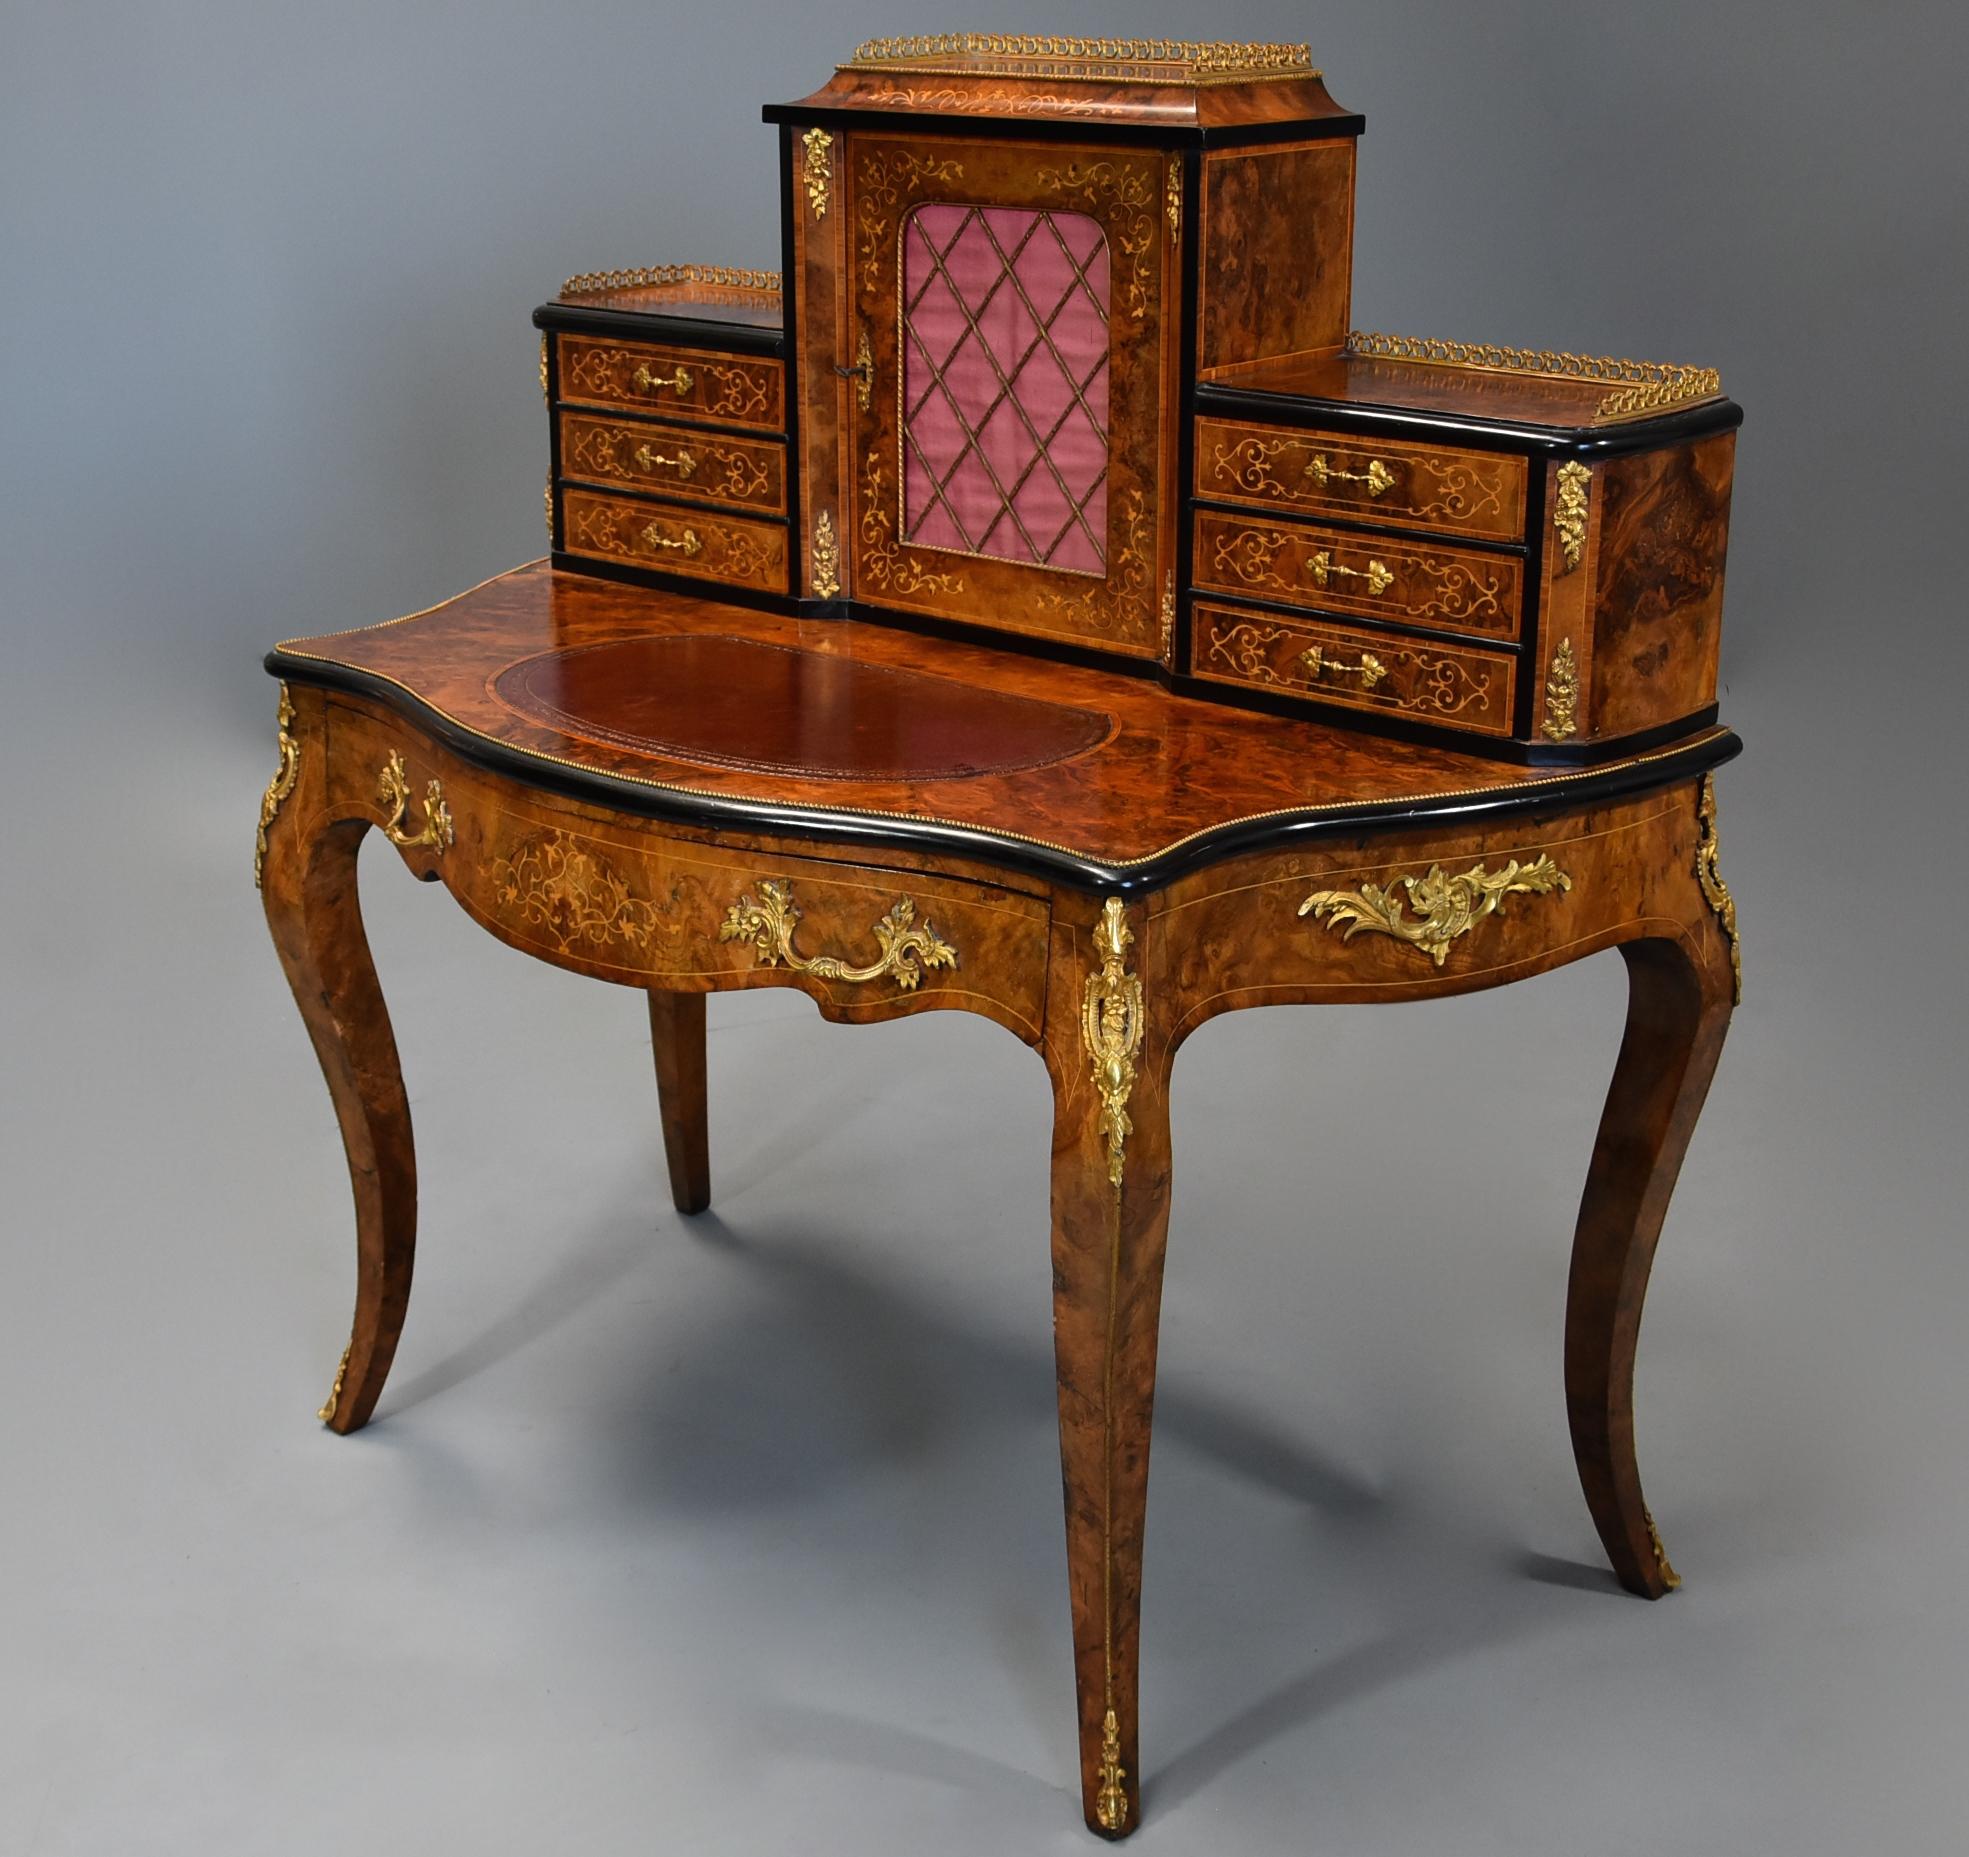 English Mid-19th Century Fine Quality Burr Walnut Bonheur de Jour in the French Style For Sale